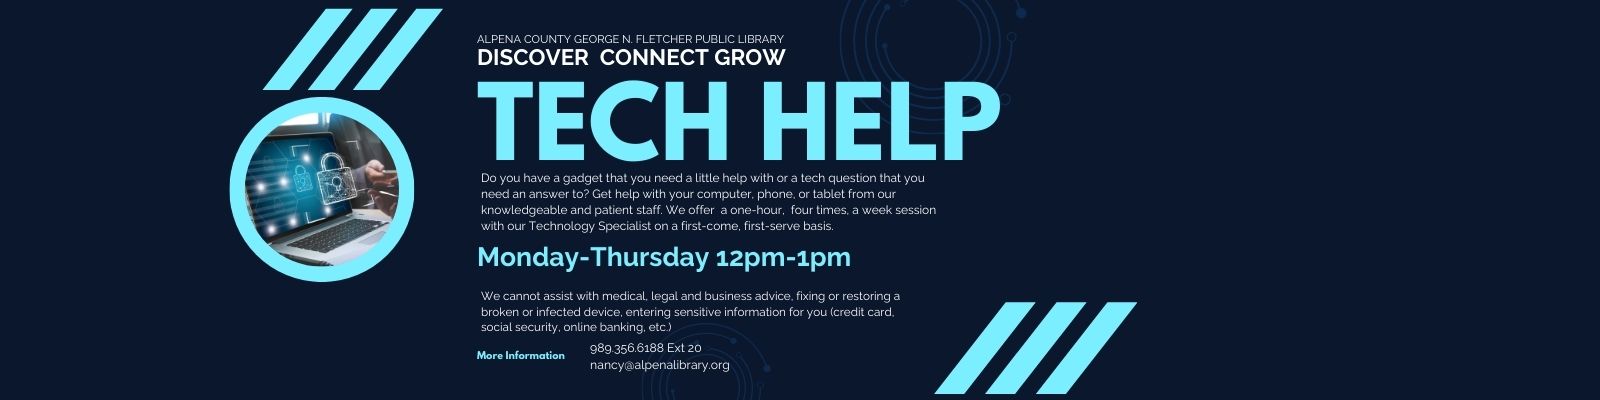 Tech Help event graphic